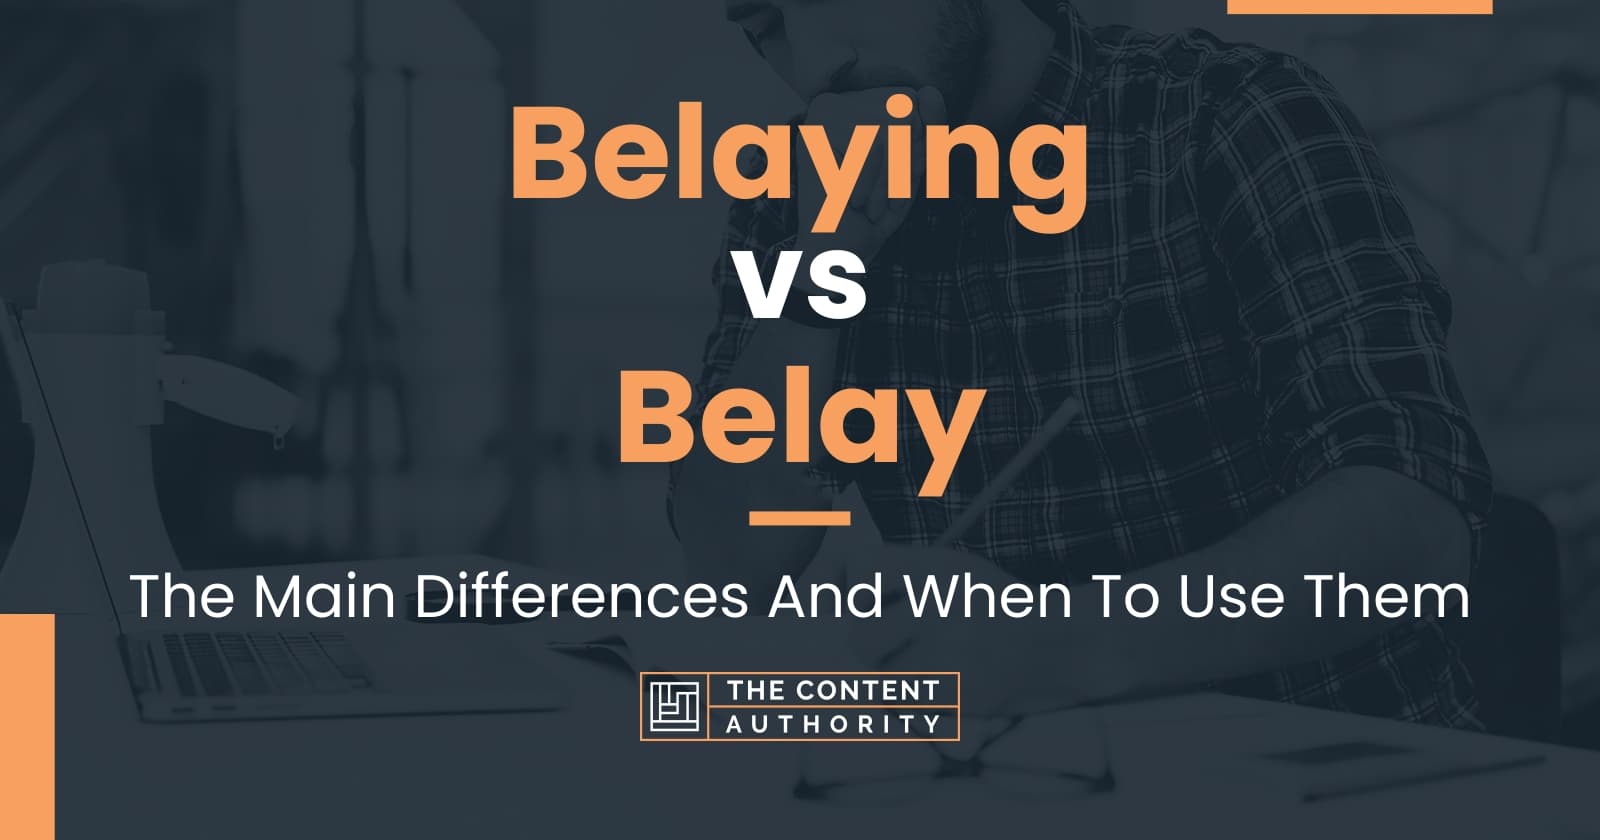 Belaying vs Belay: The Main Differences And When To Use Them